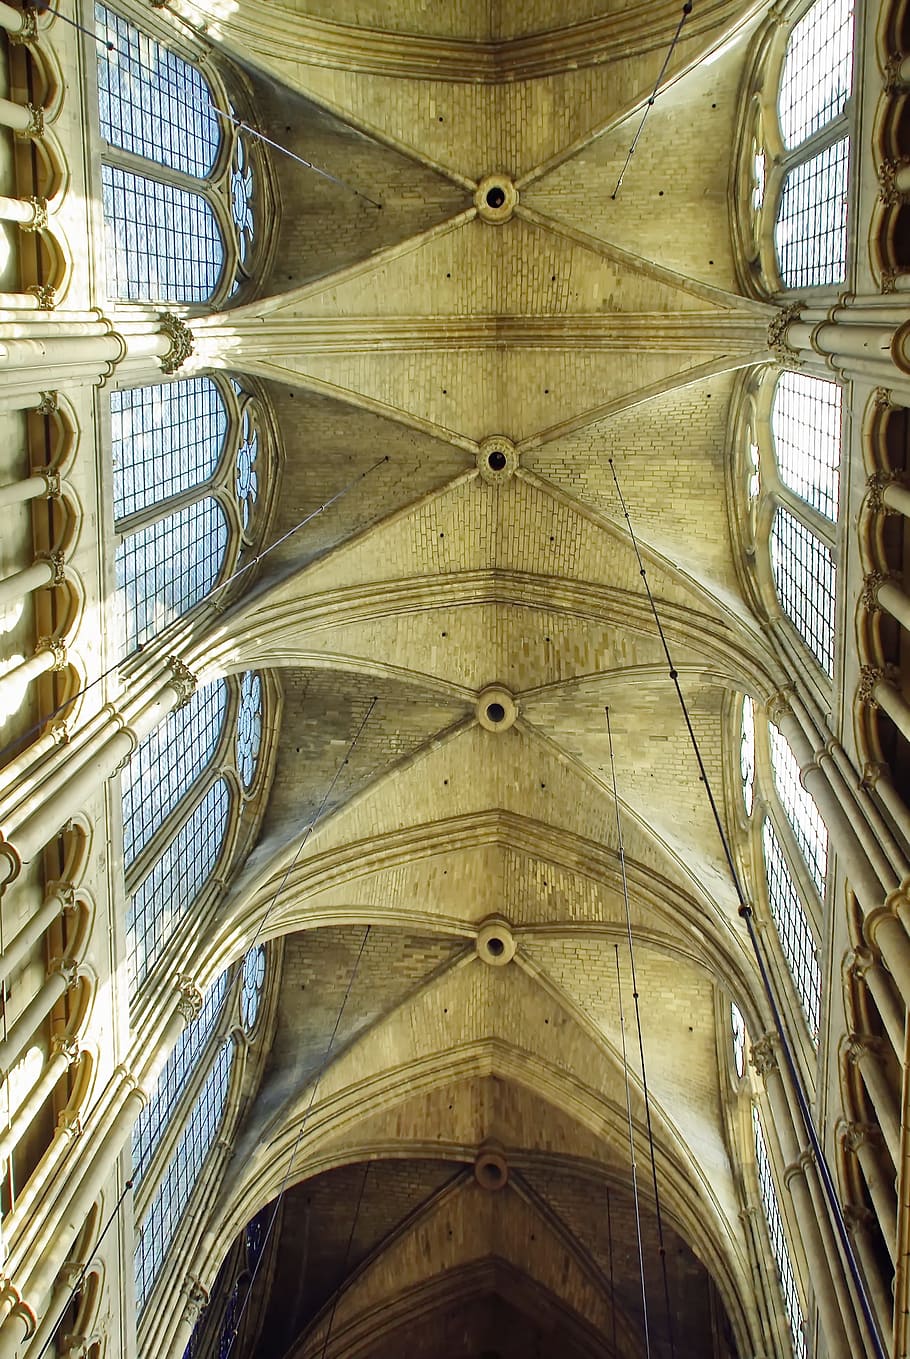 reims, cathedral, nave, ceiling, gothic architecture, vaults, ribs, arc, window, clarity